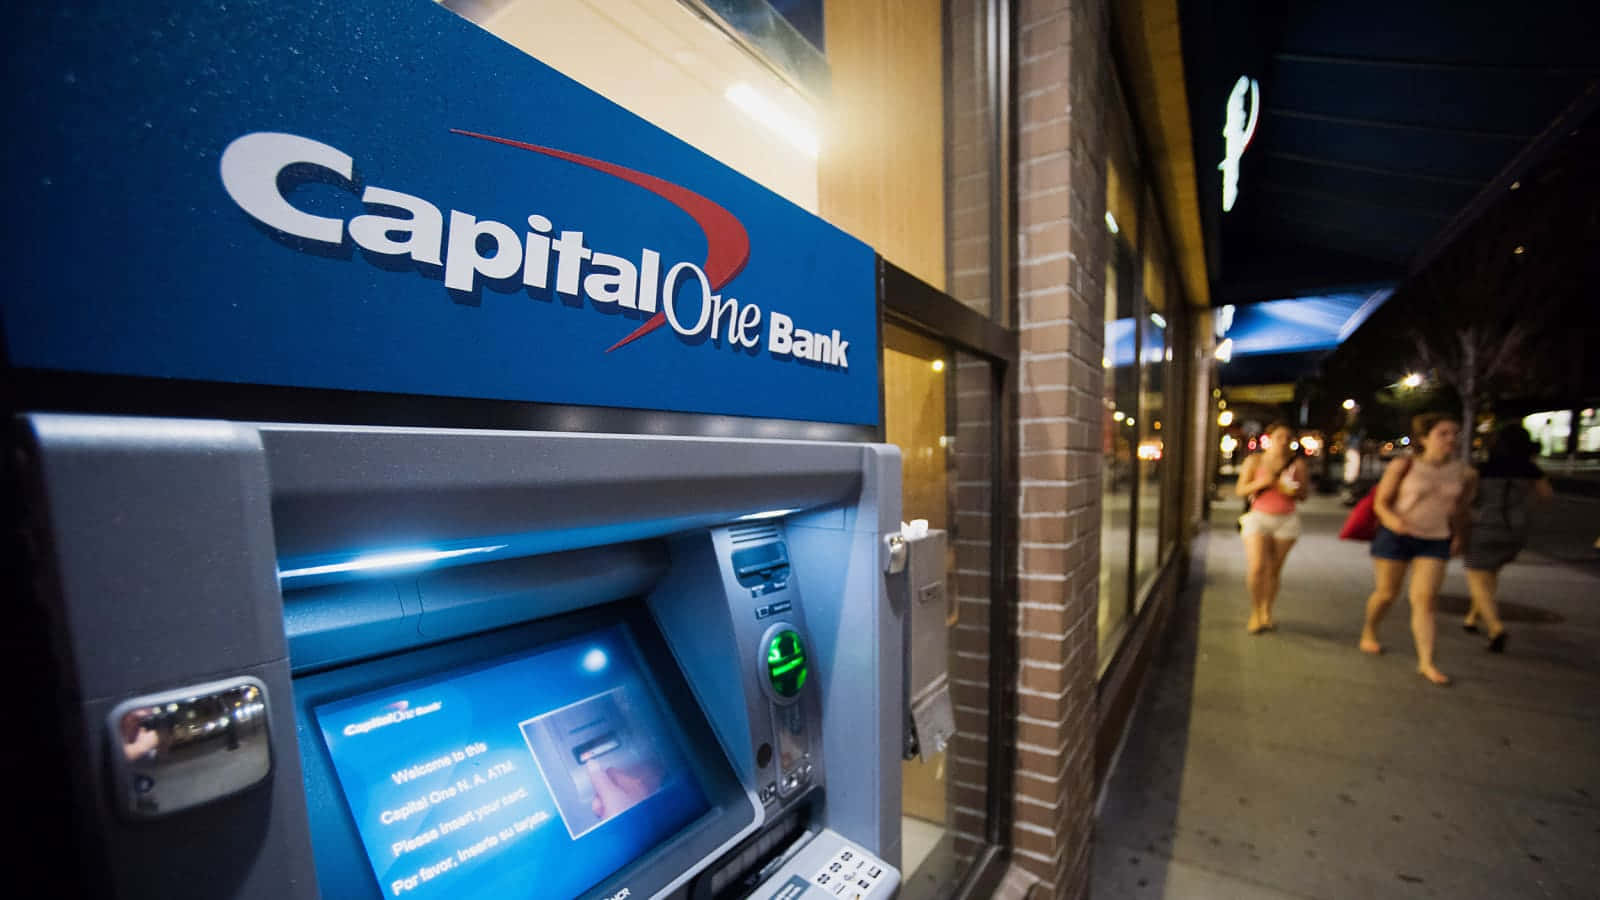 Capital One Atm At Night Wallpaper